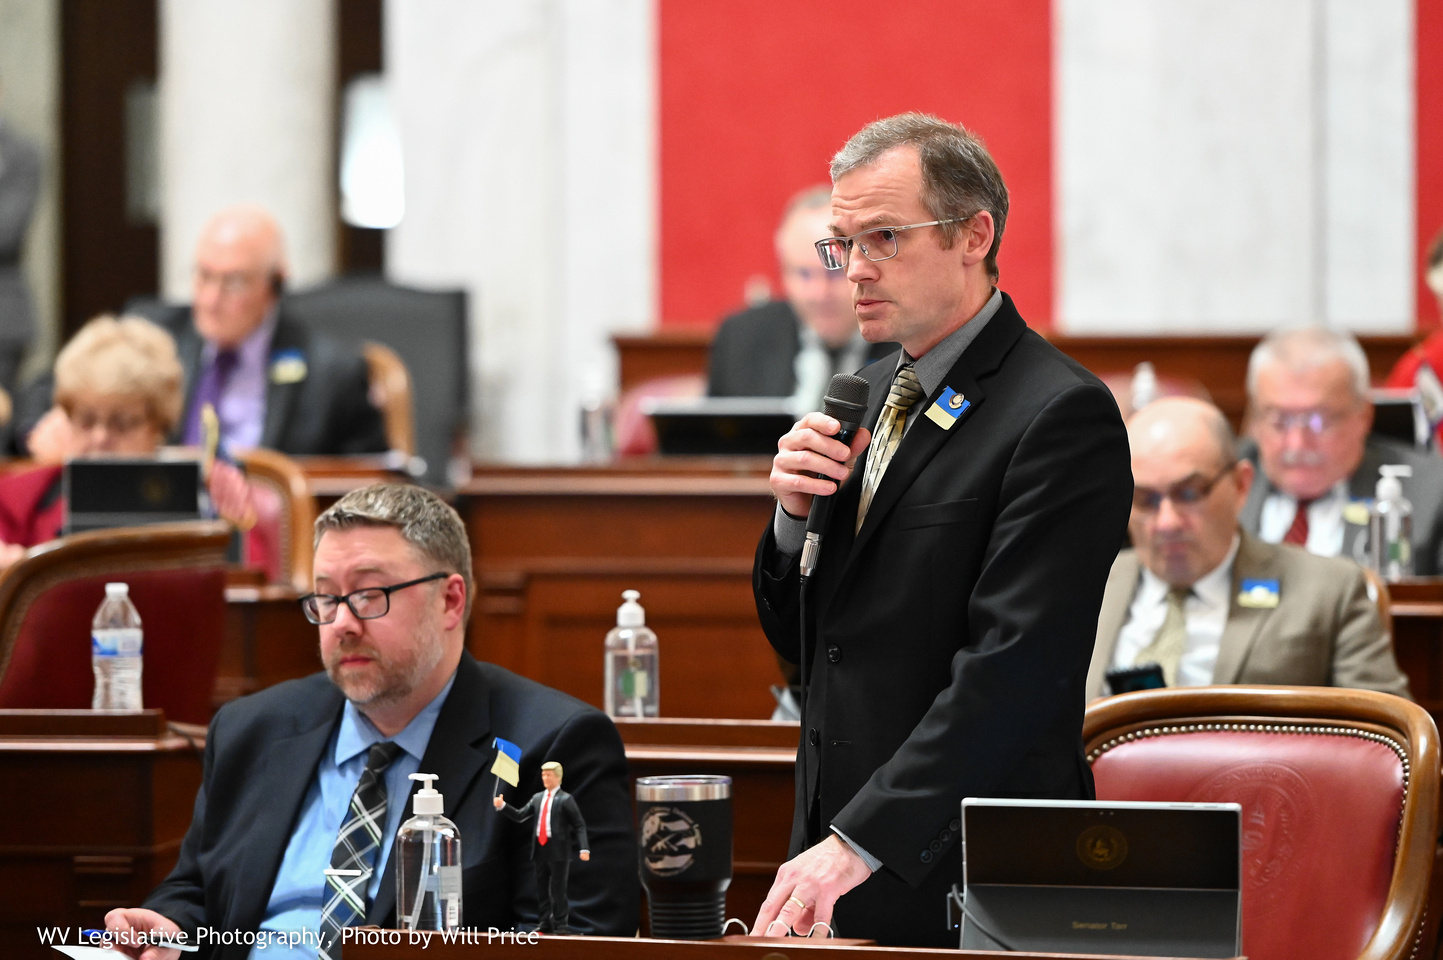 Senate Completes Action on State Employee Pay Raise Wrap Up